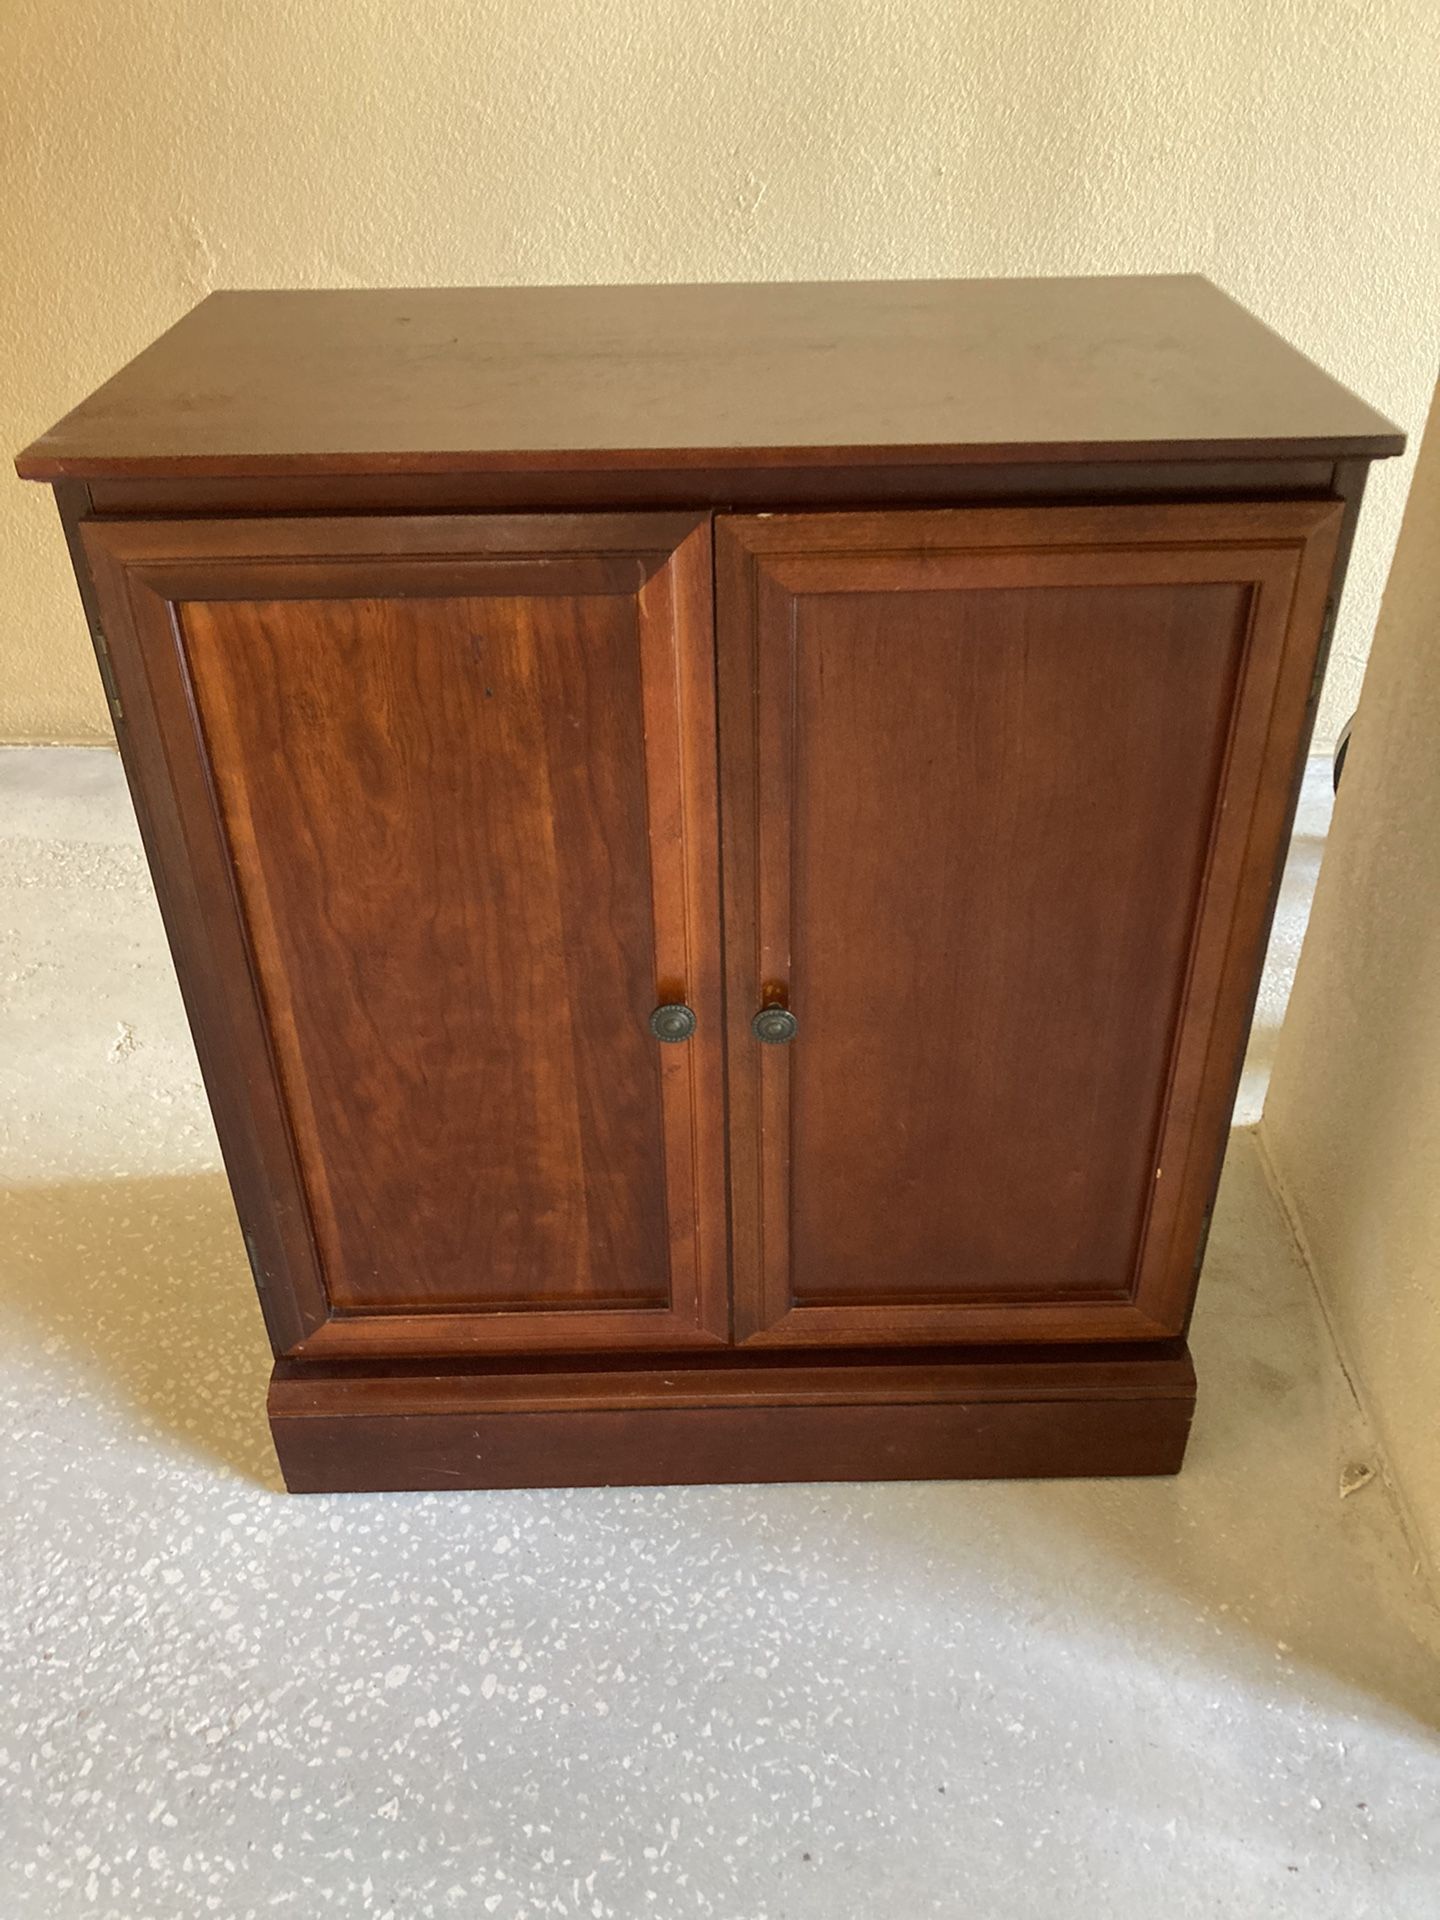 Wooden  Cabinet-  Tv Stand   Reducing To $10